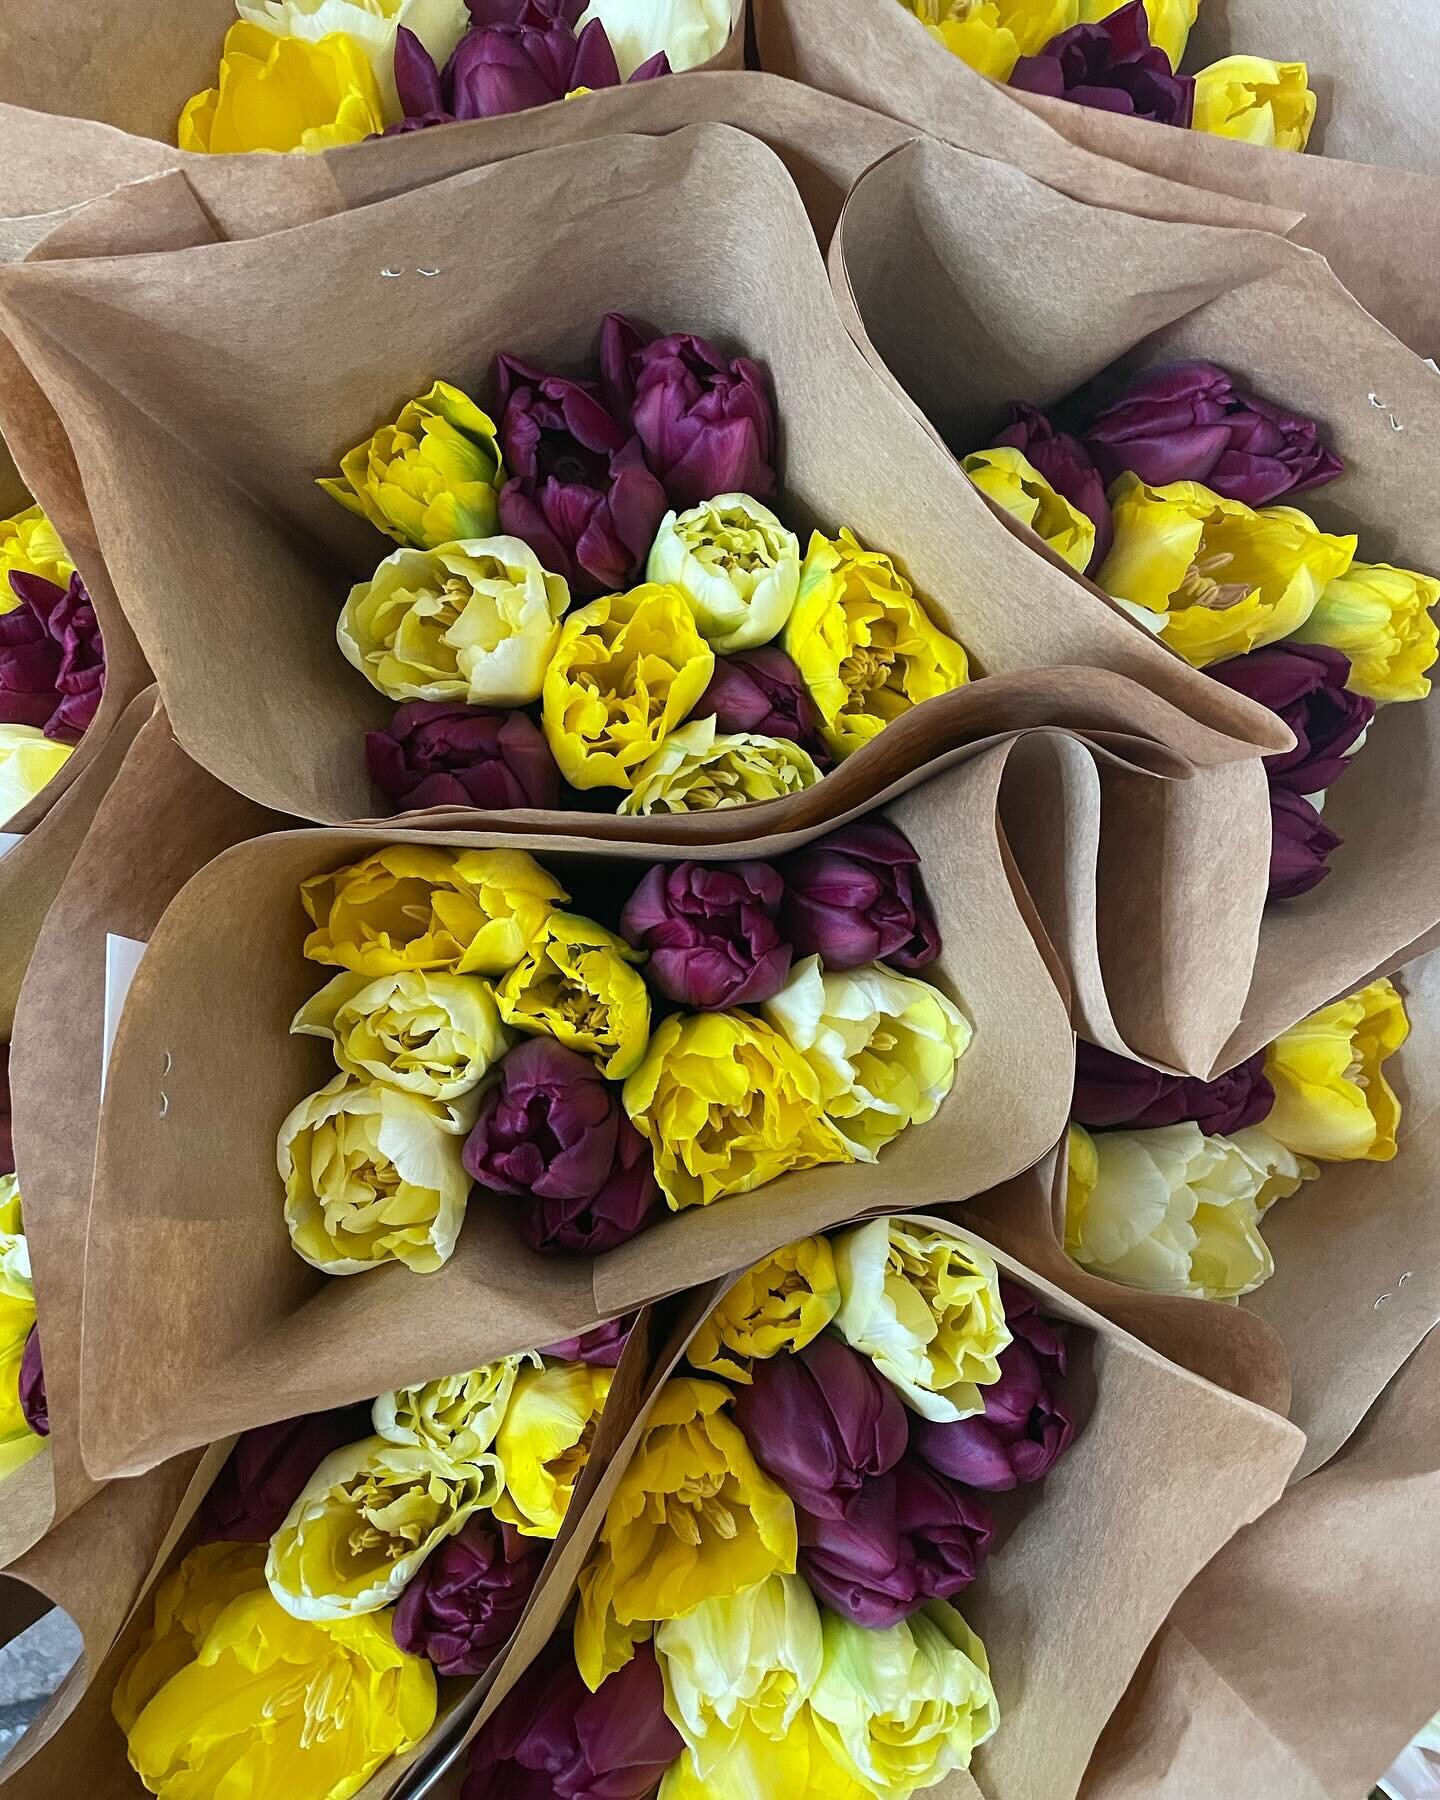 First batch of Tulip CSA bouquets went out this morning to @luckyscoffeegarage and @stillnorthbooks. Remember to keep your tulips protected in this crazy cold weather!

#uppervalleyvtnh #uppervalley #lebanonnh #hanovernh #tulipmania #tulipobsession #